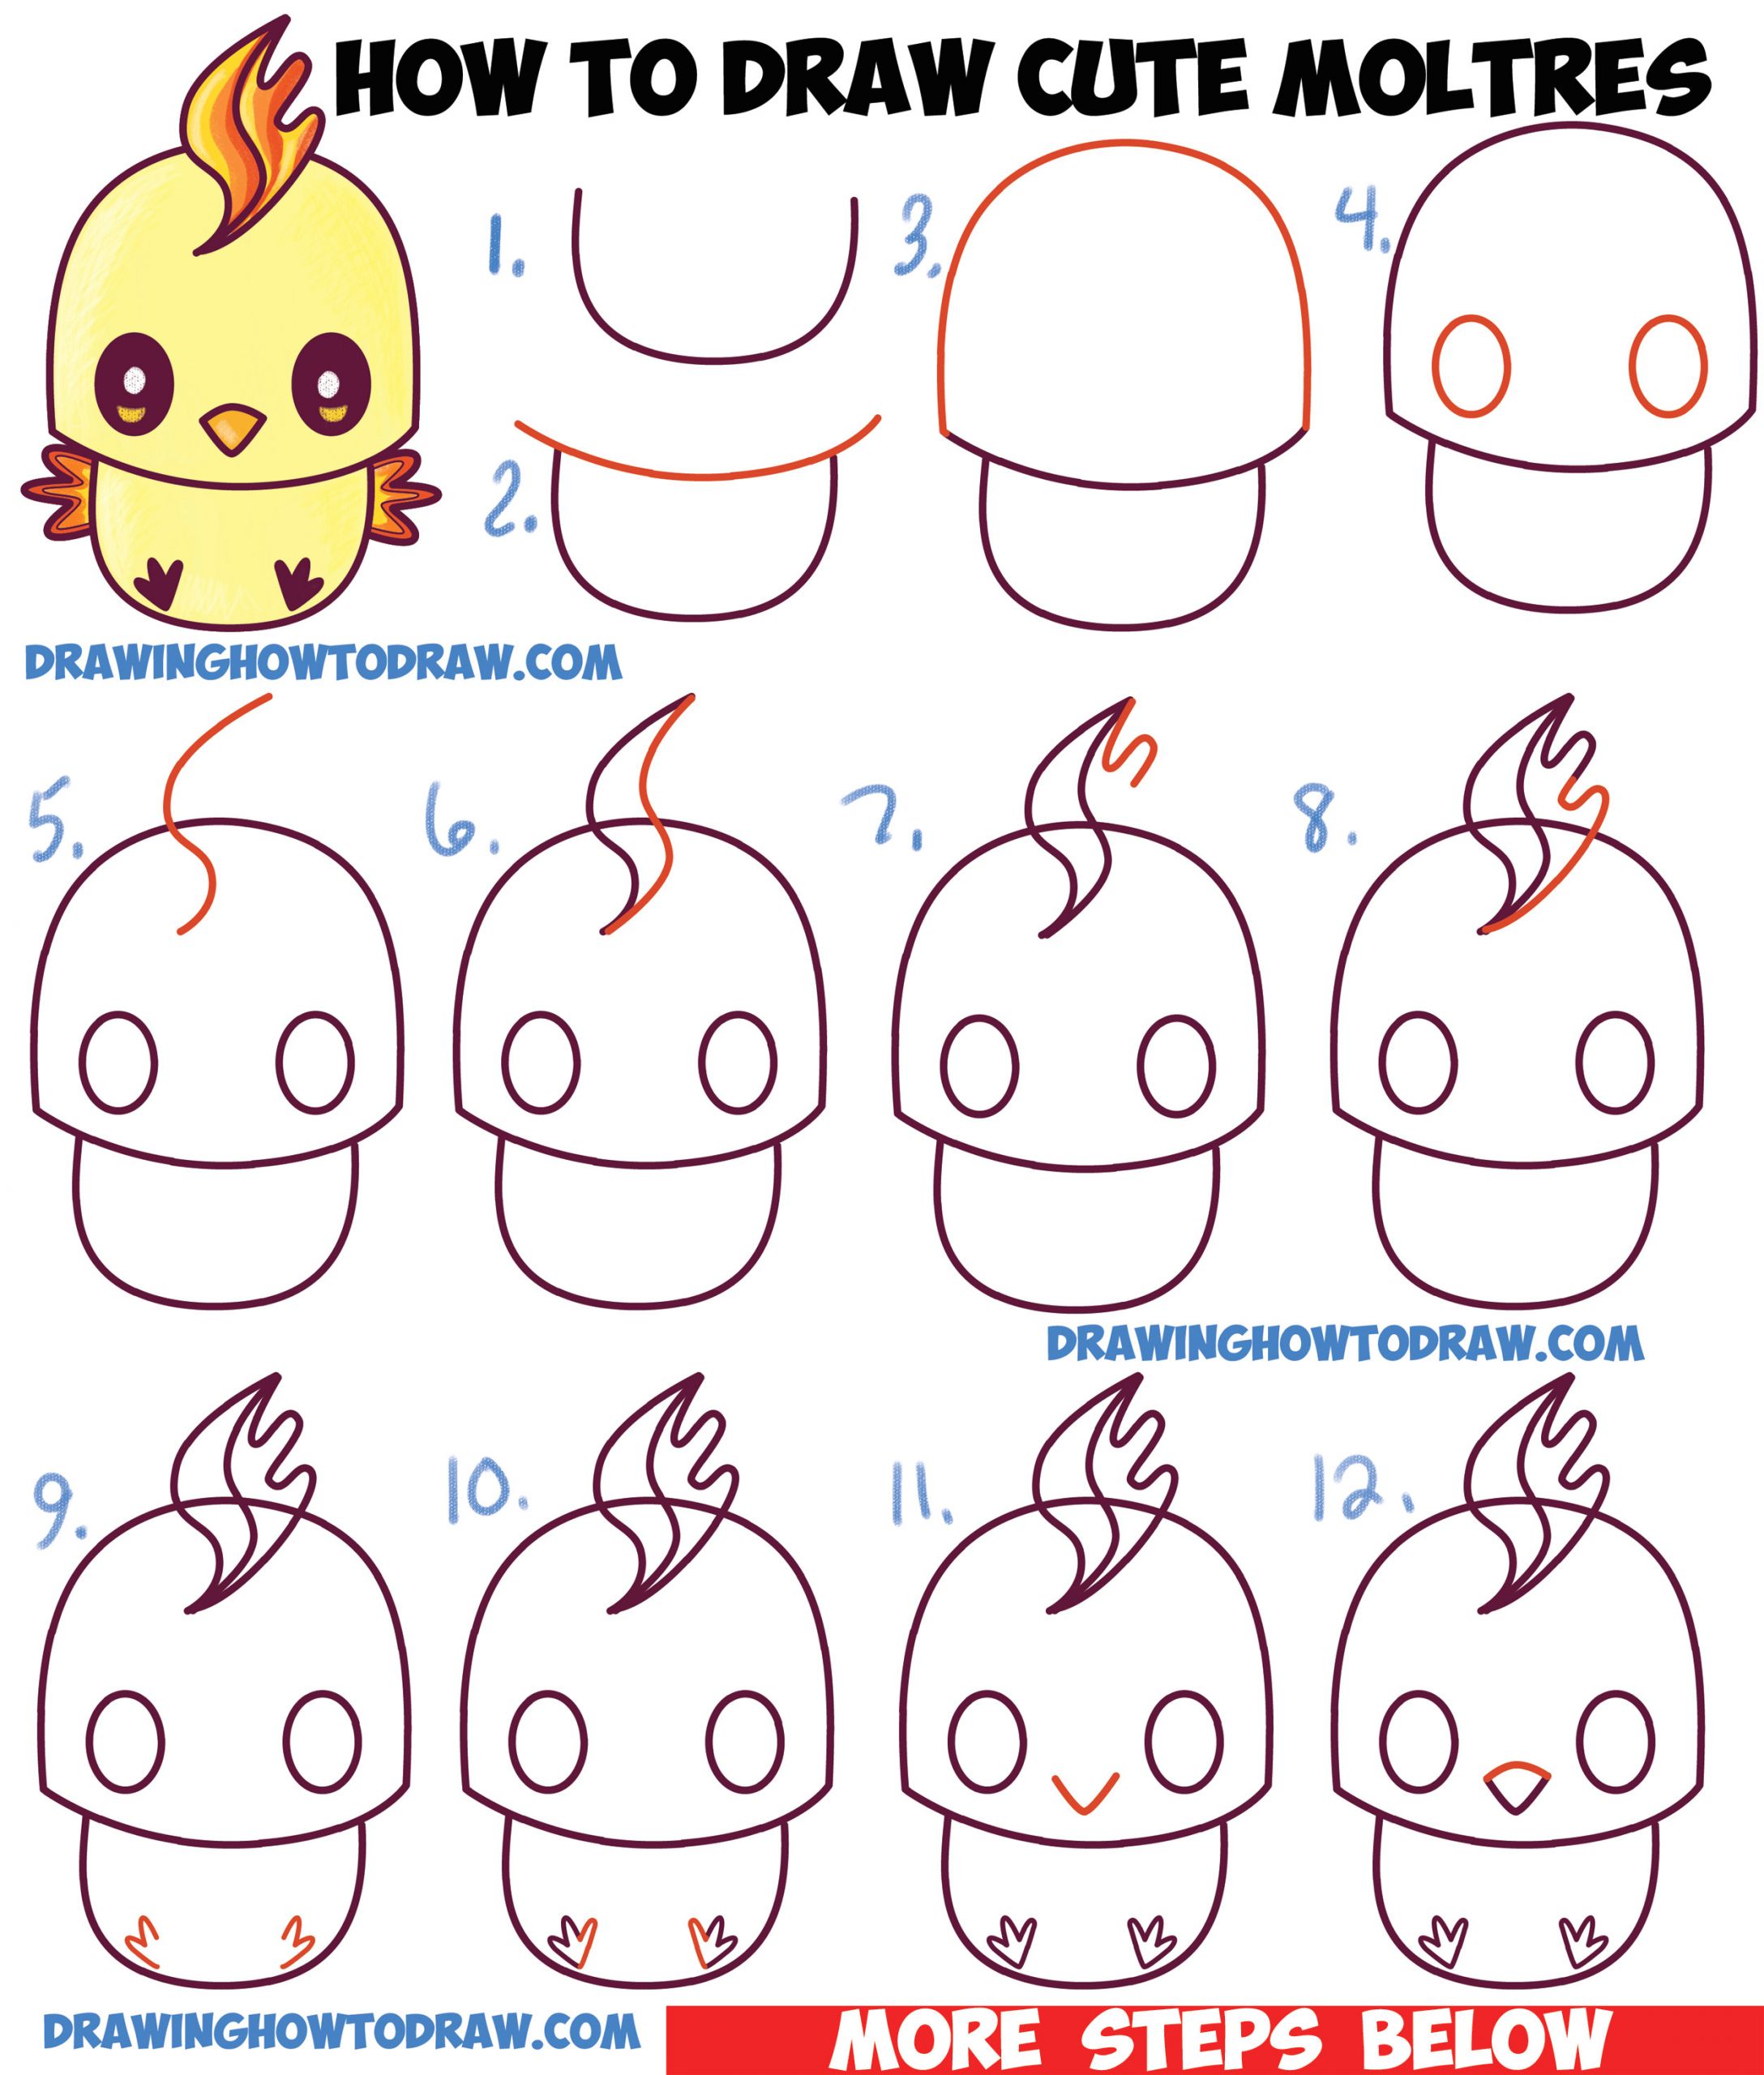 Beginner Easy Step by Step Drawing 73 Obvious How to Draw Step by Step Easy for Beginners